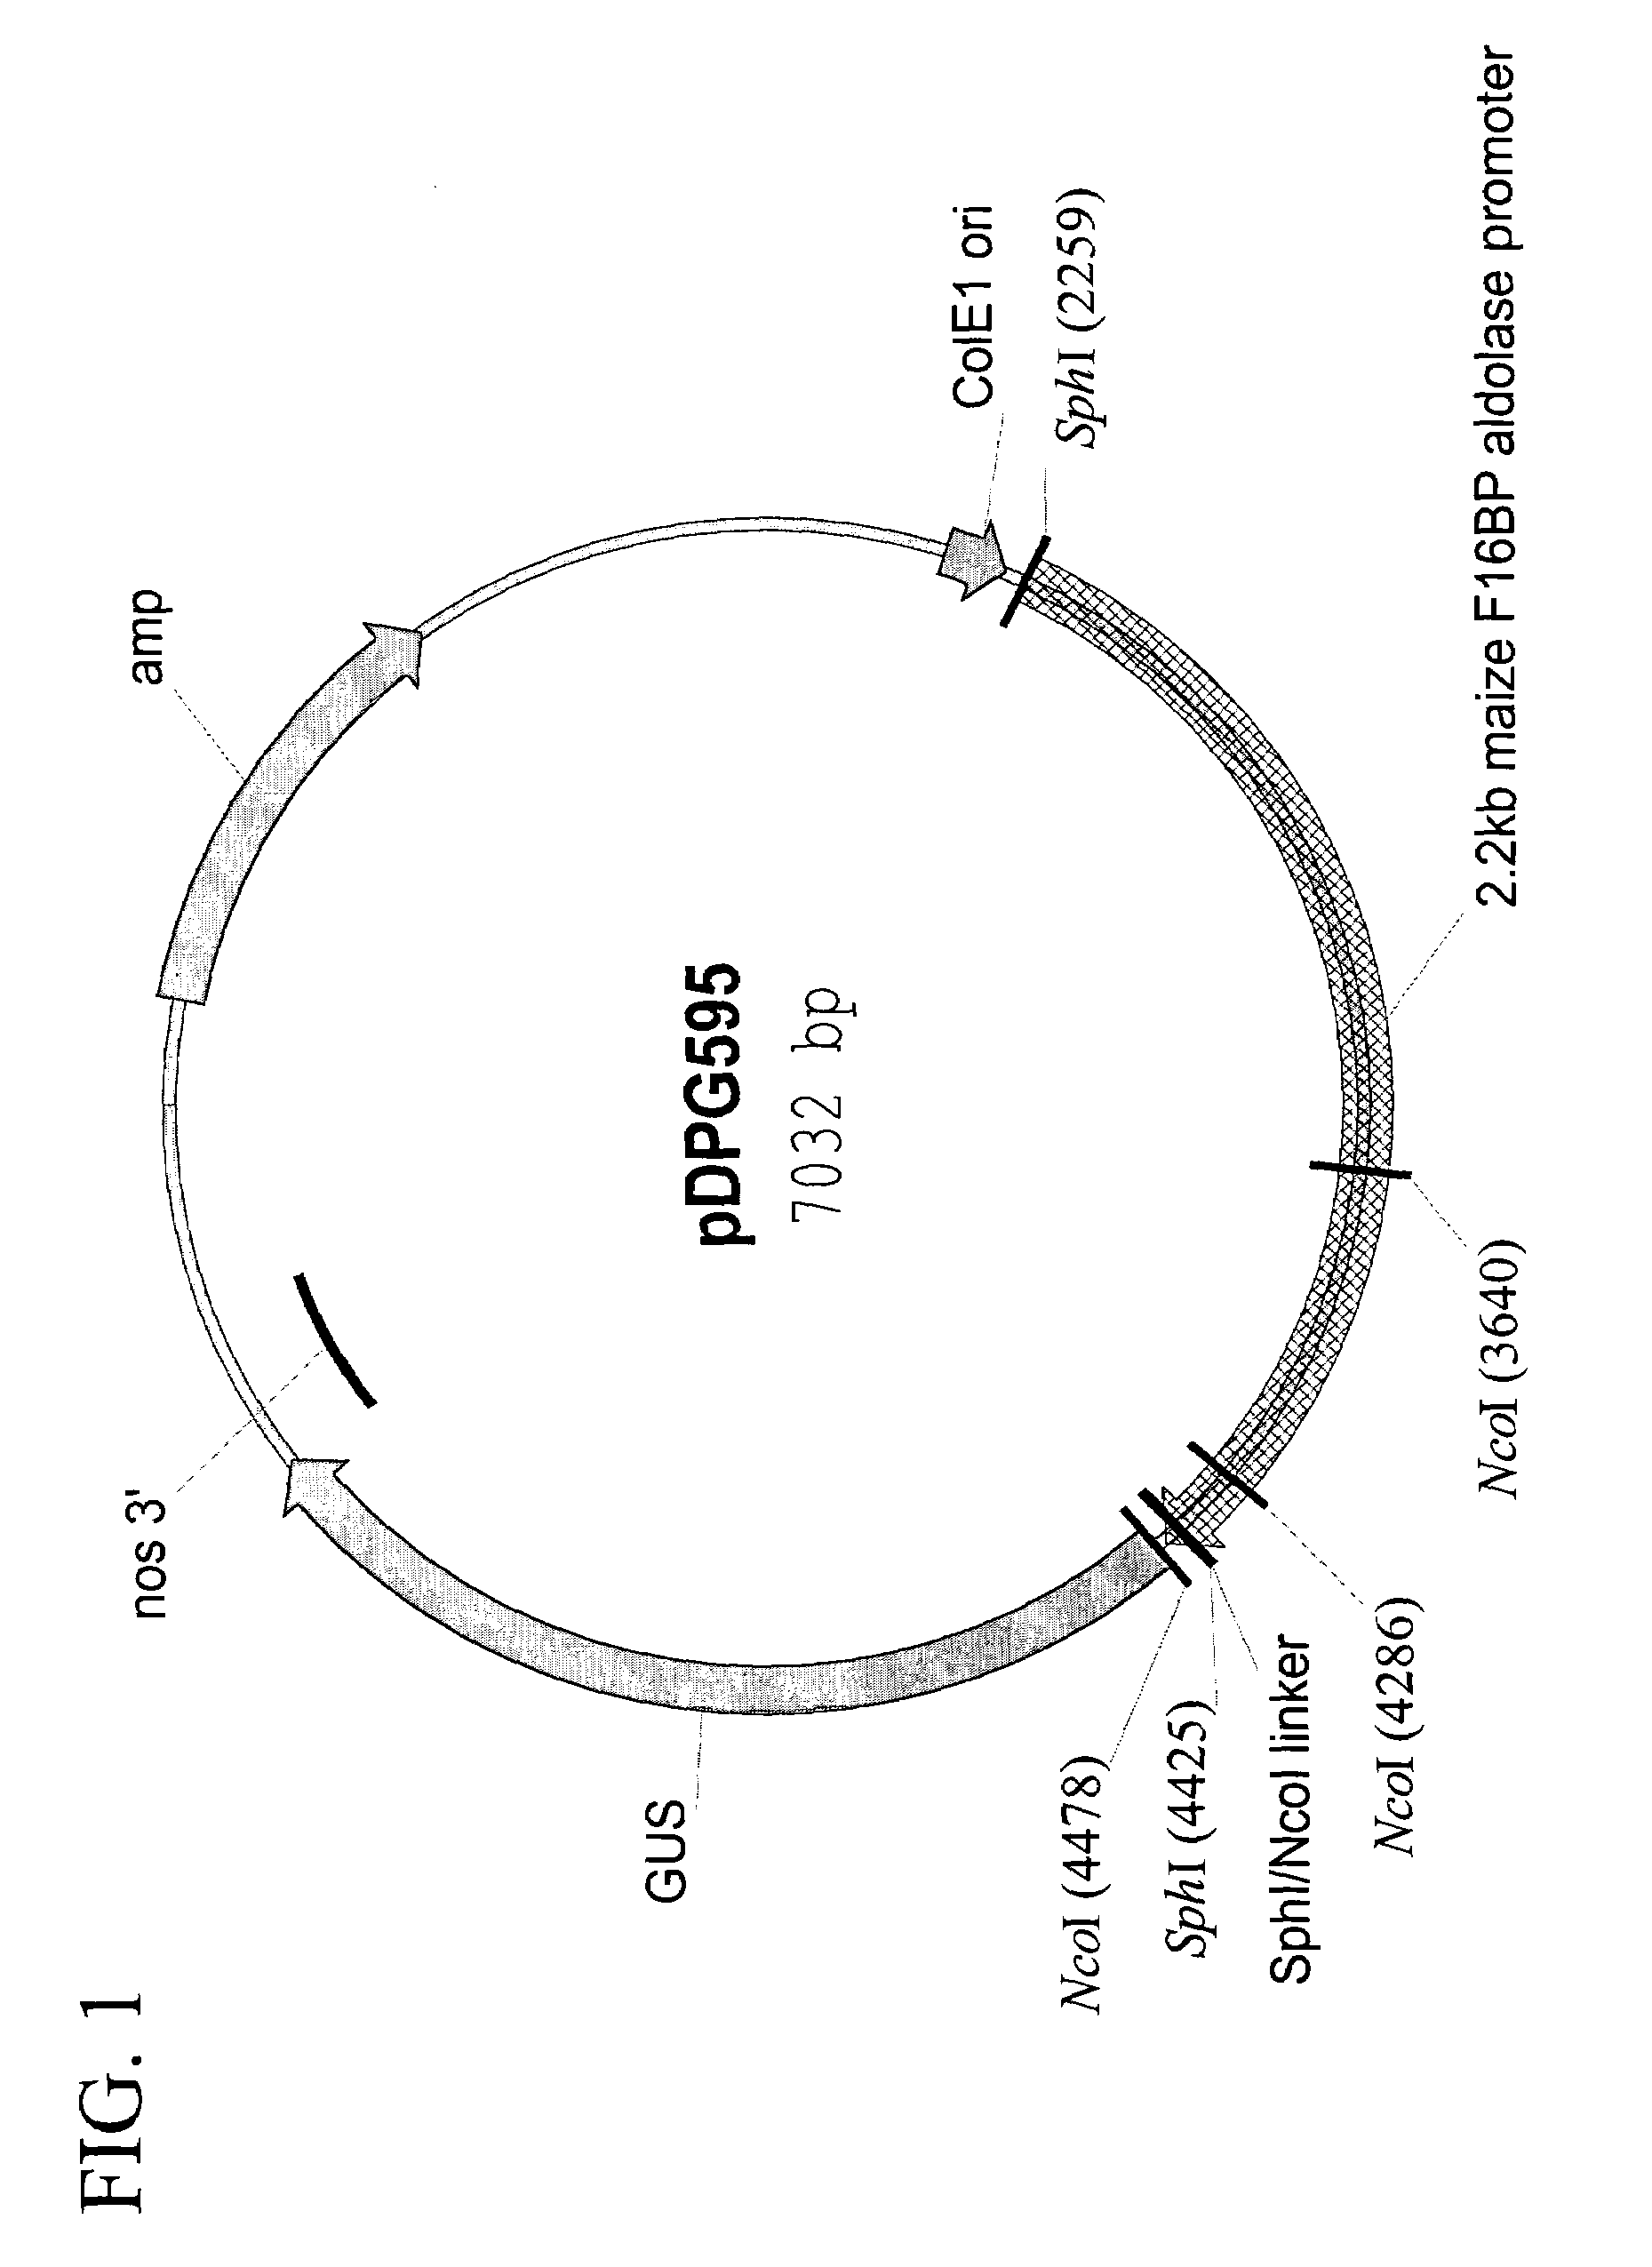 Maize chloroplast aldolase promoter compositions and methods for use thereof